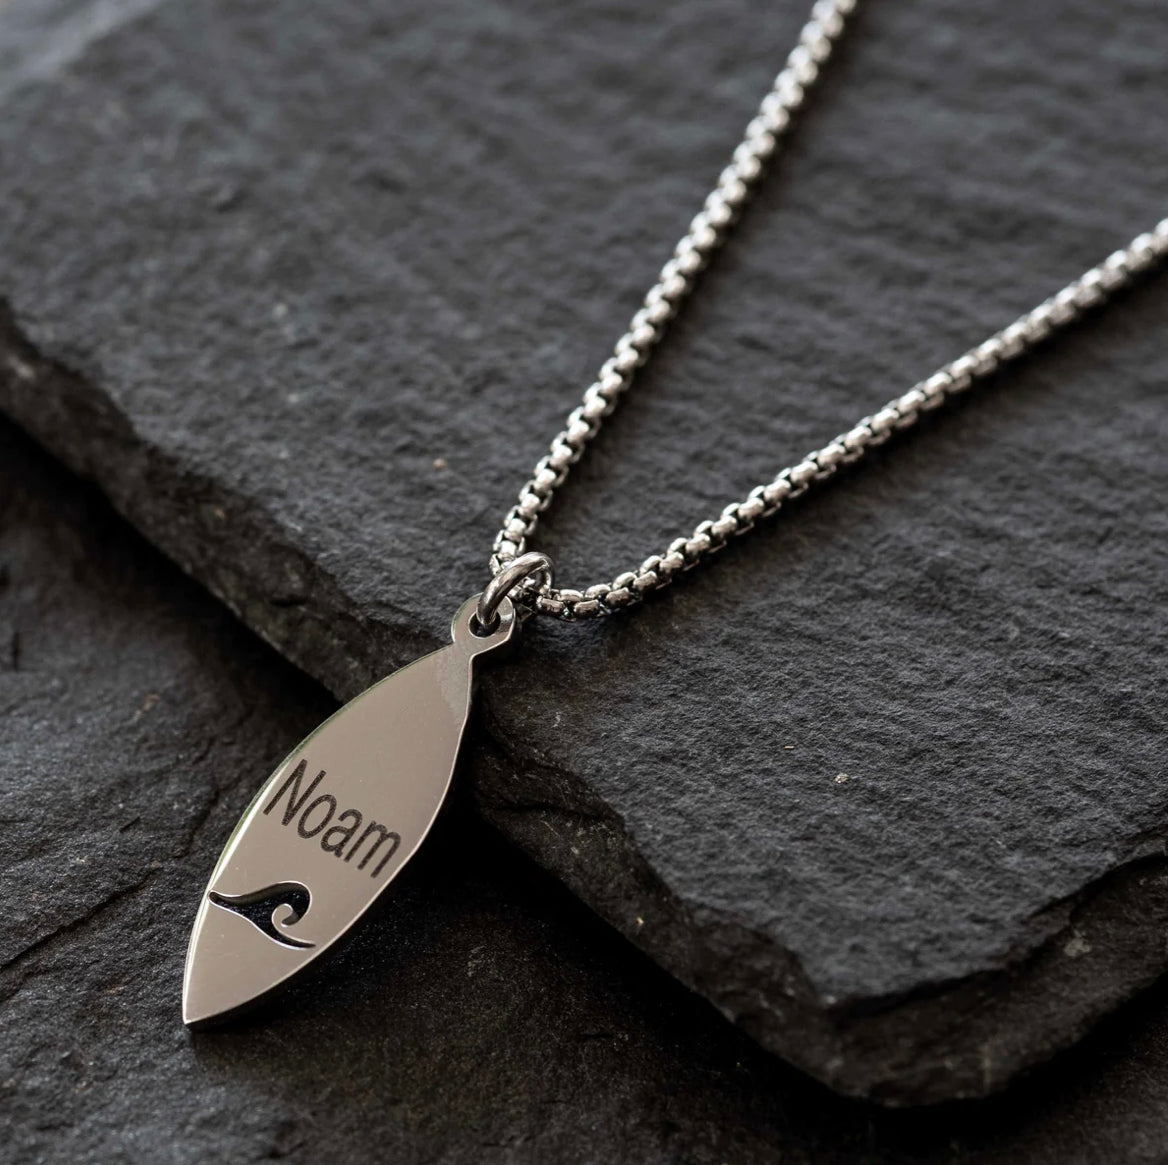 Stainless Steel Surfboard Pendant with Wave engraved